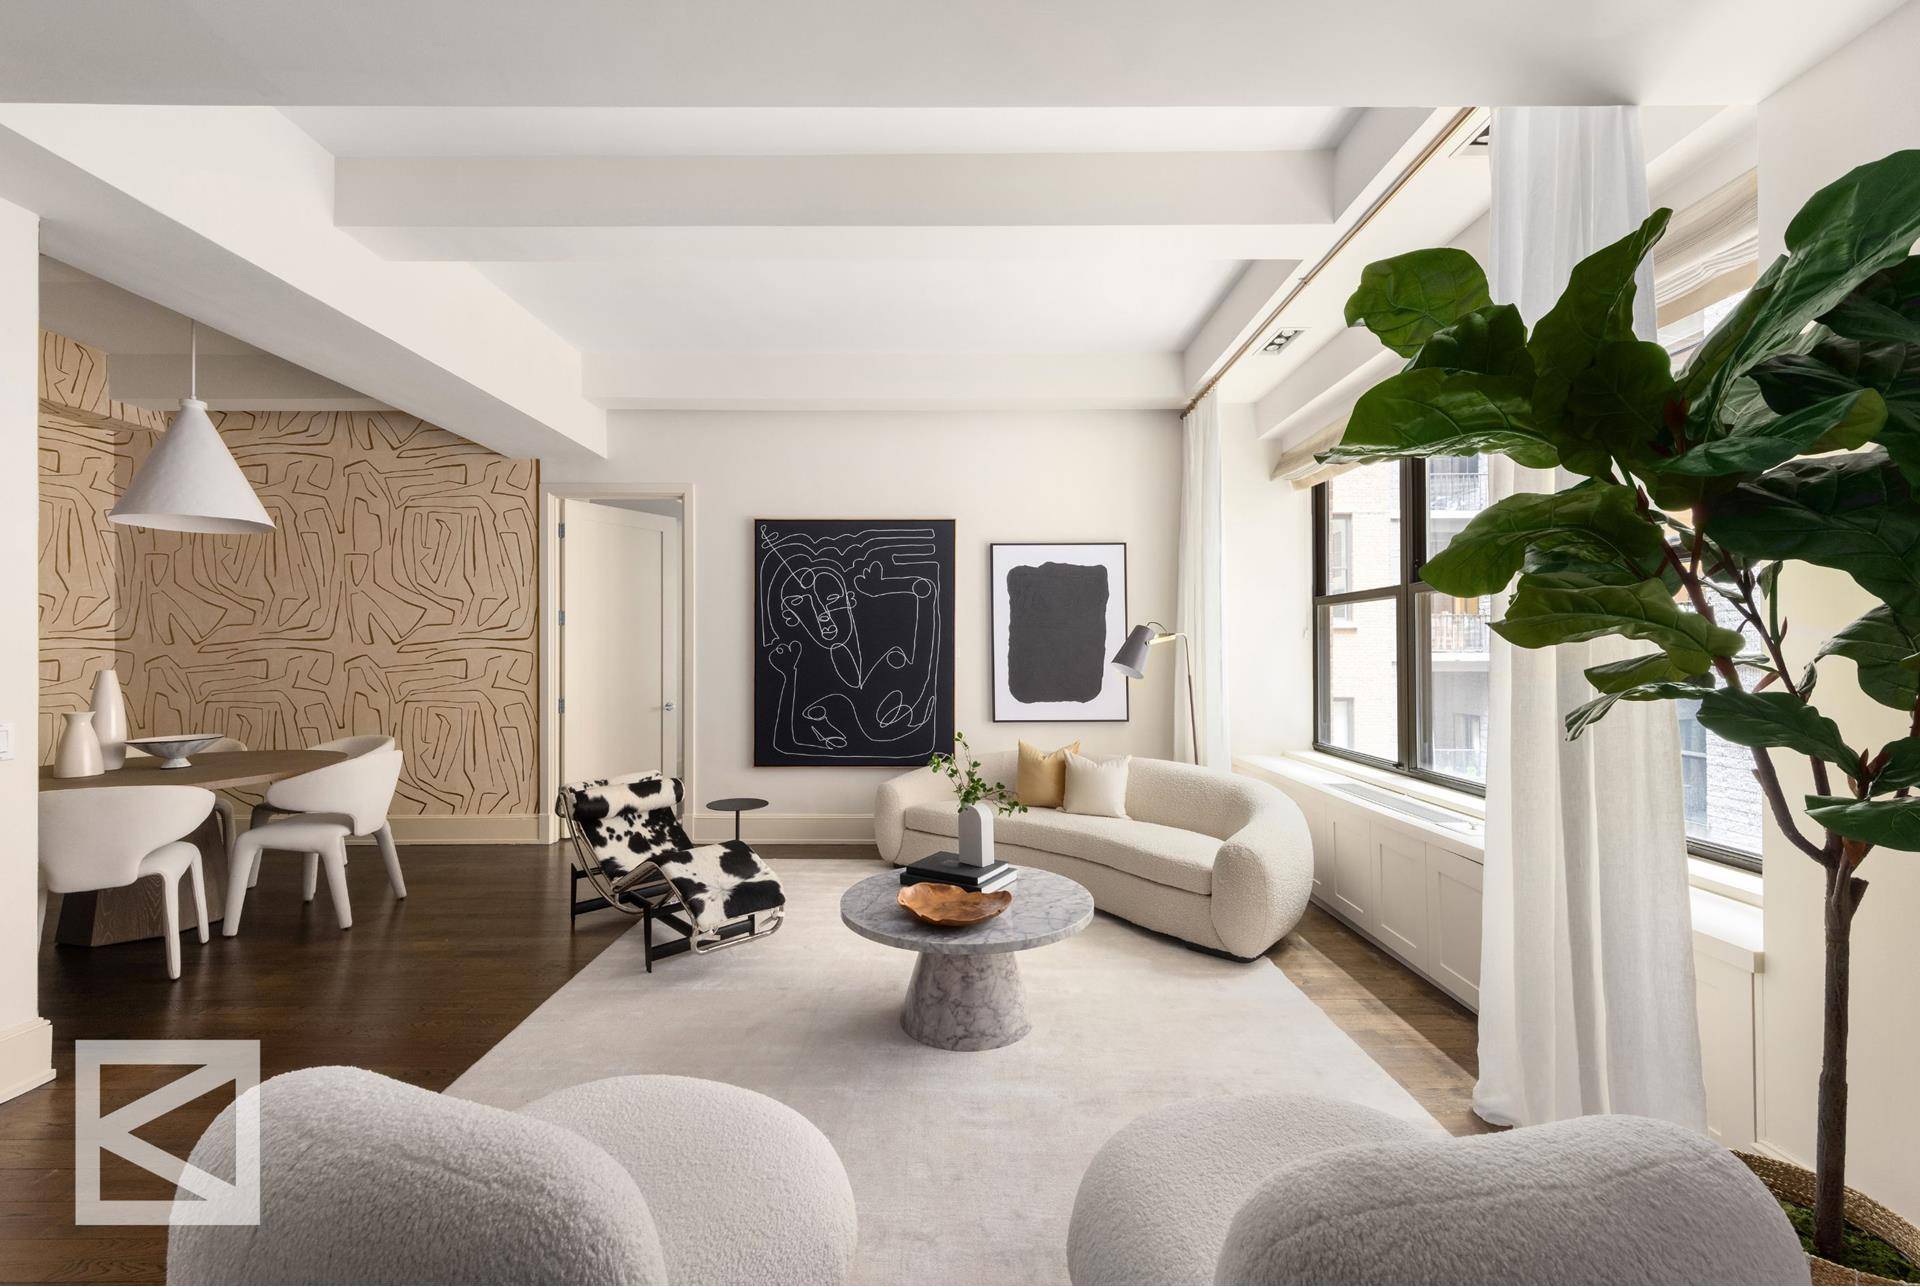 Located in the heart of Gramercy at Park Avenue South and 21st Street, this top luxe, pre war, full service condominium is set apart by its proportion and scale.